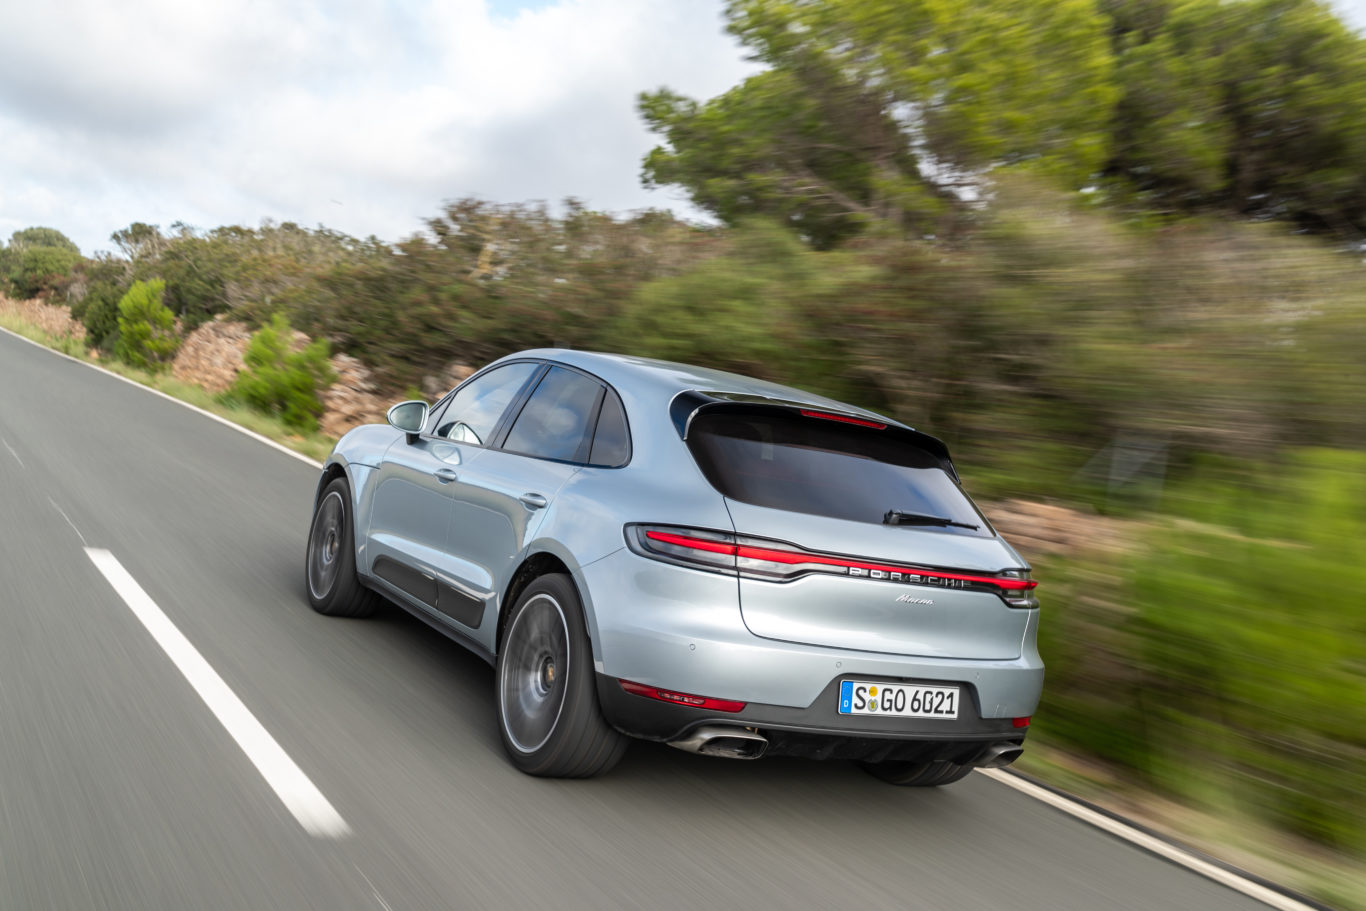 The Macan now features a full-width rear light